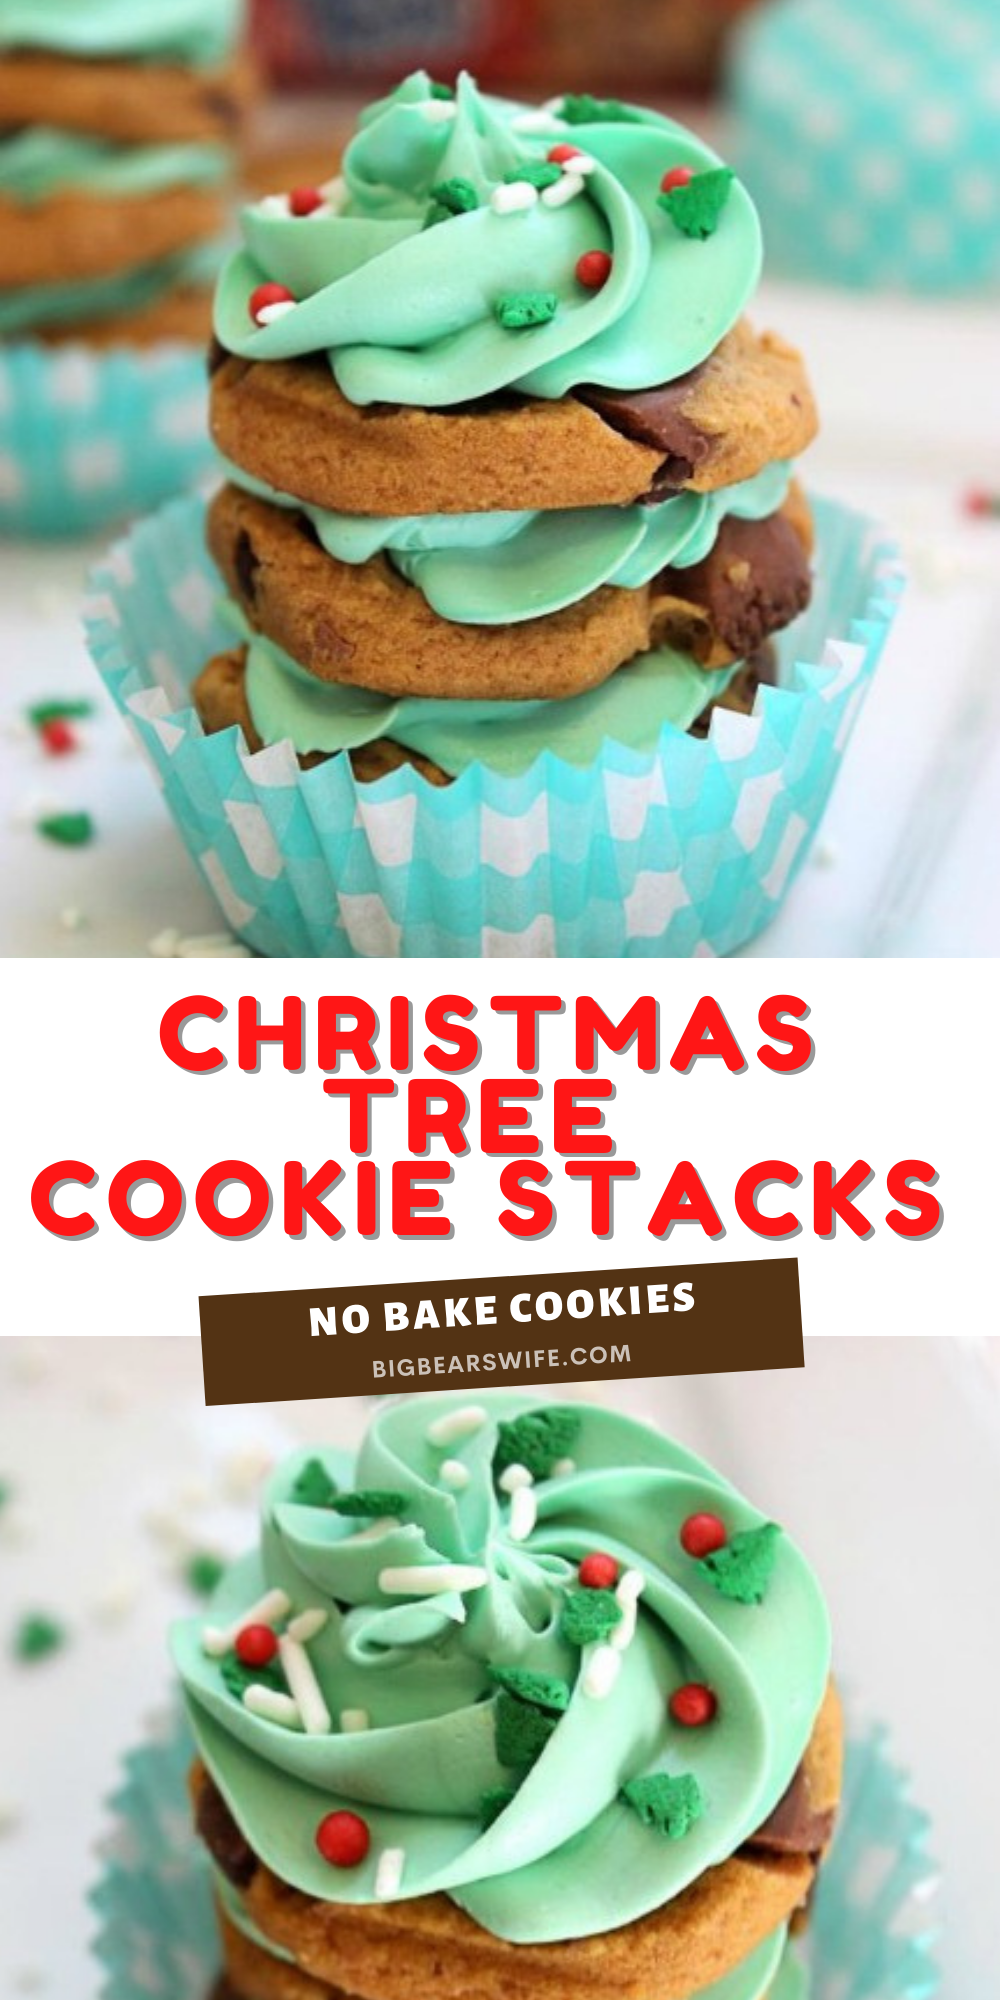 If you need a quick but cute no bake Christmas dessert, these No Bake Christmas Tree Cookie Stacks are for you! They're made with stacks of store-bought cookies and frosting to create the cutest little Christmas treats.  via @bigbearswife